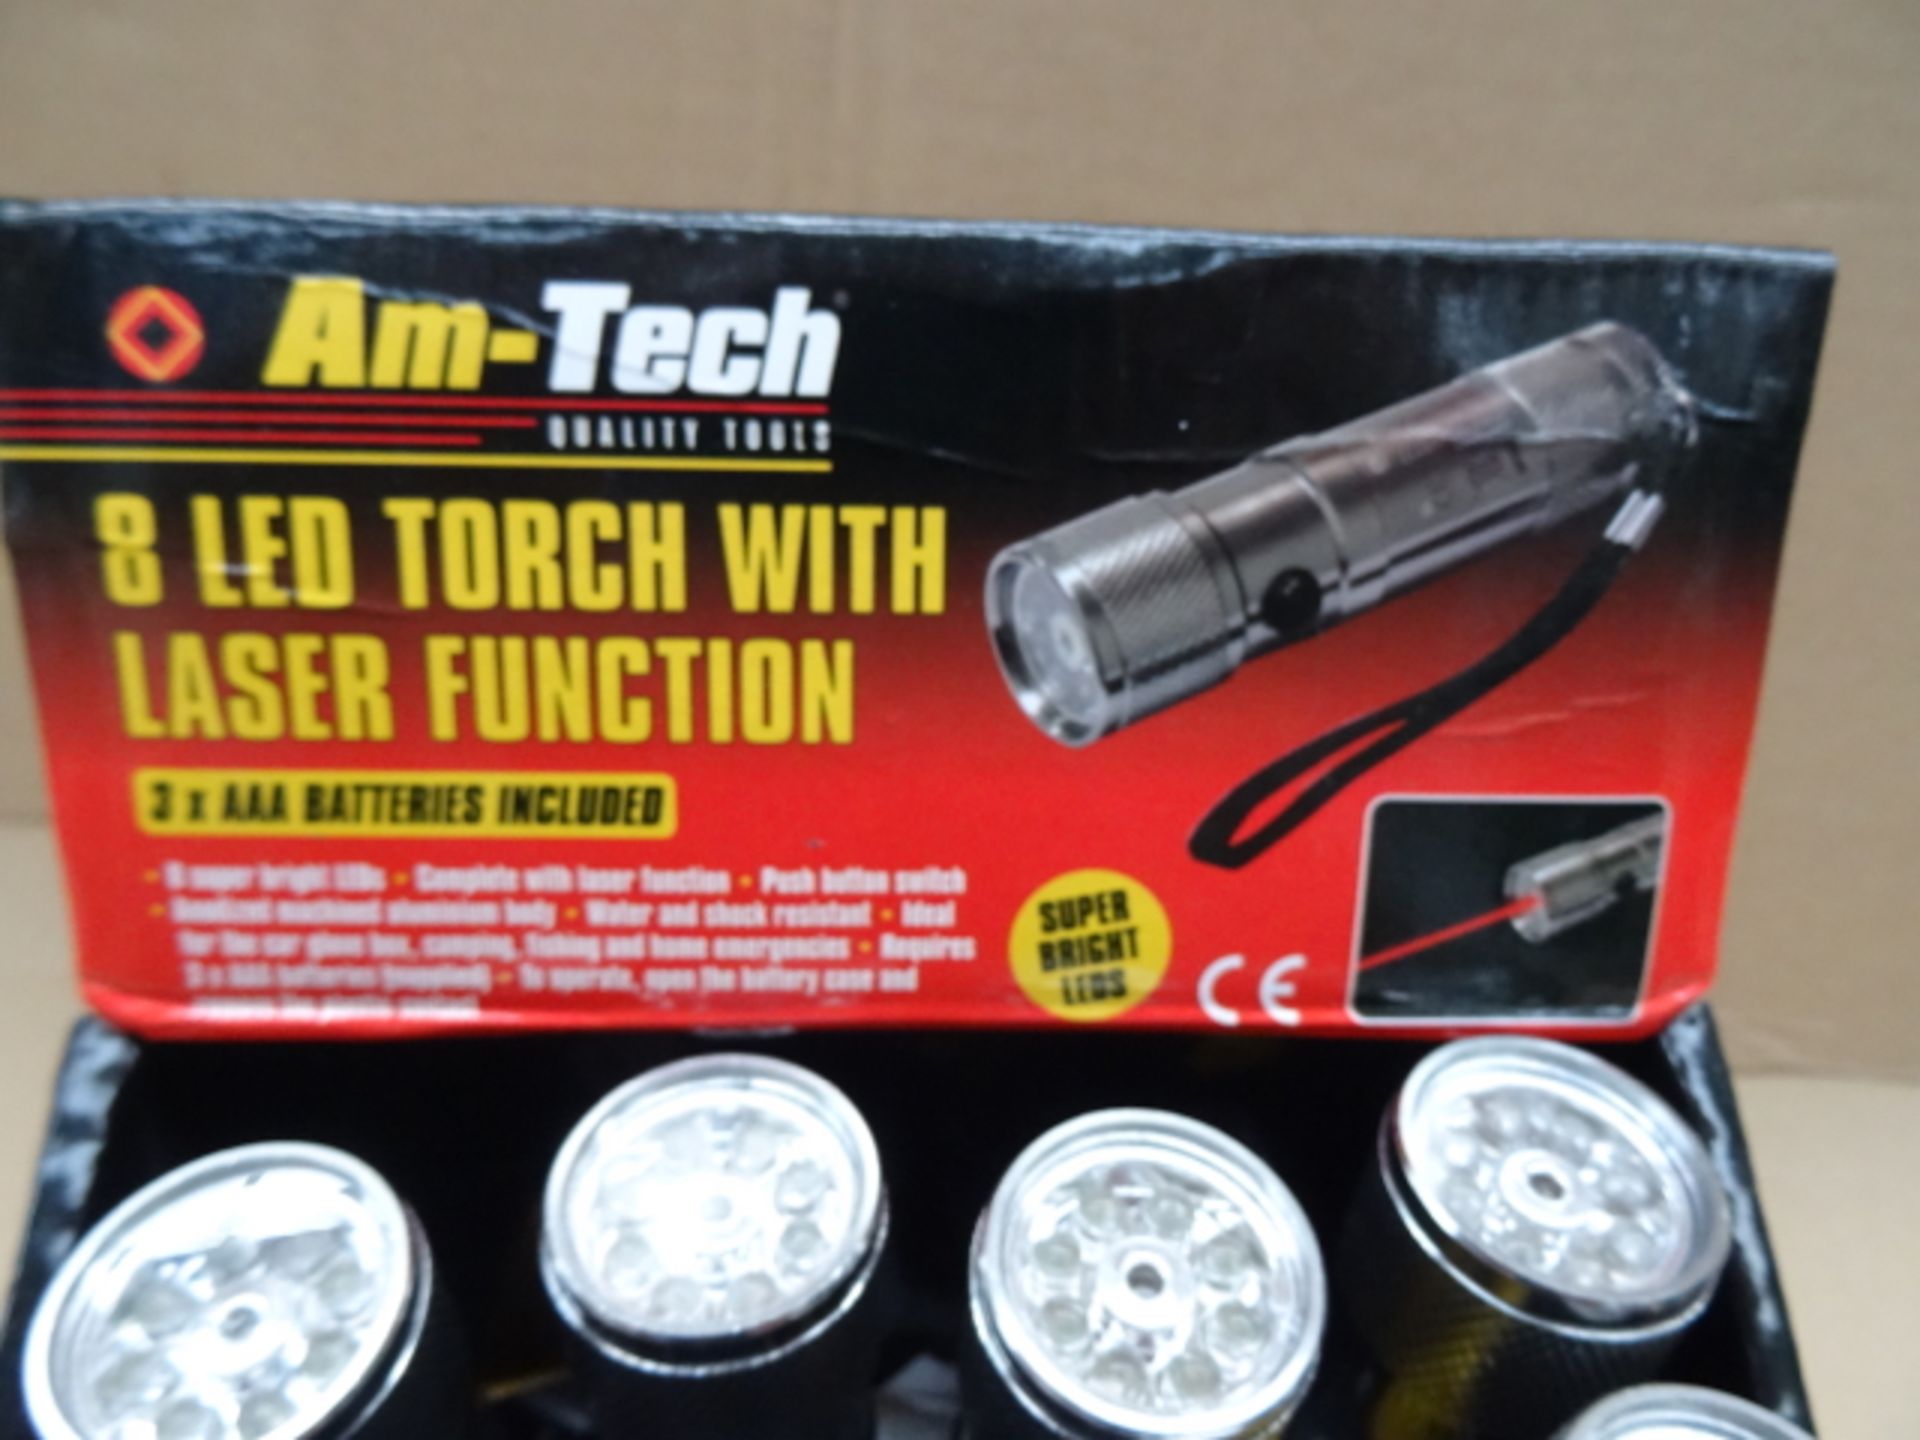 96 x Am-Tech Quality Tools. 8 LED Torch With Laser Function. 8 Super Bright LEDs. Complete with - Image 3 of 3